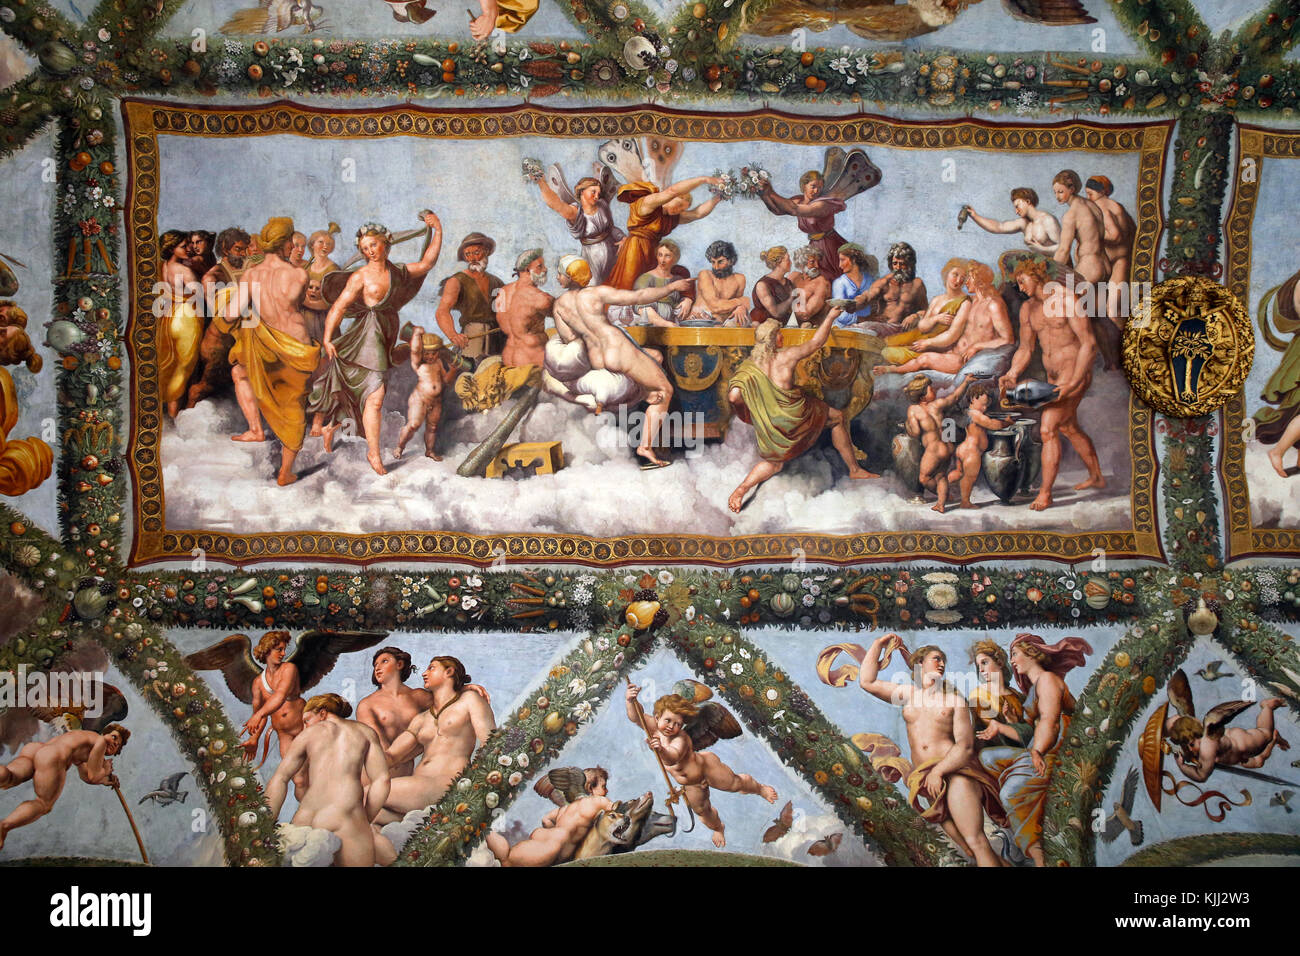 Villa Farnesina, Rome. The Loggia of Cupid and Psyche, frescoed ceiling painted by Raphael and his workshop in 1518. Italy. Stock Photo